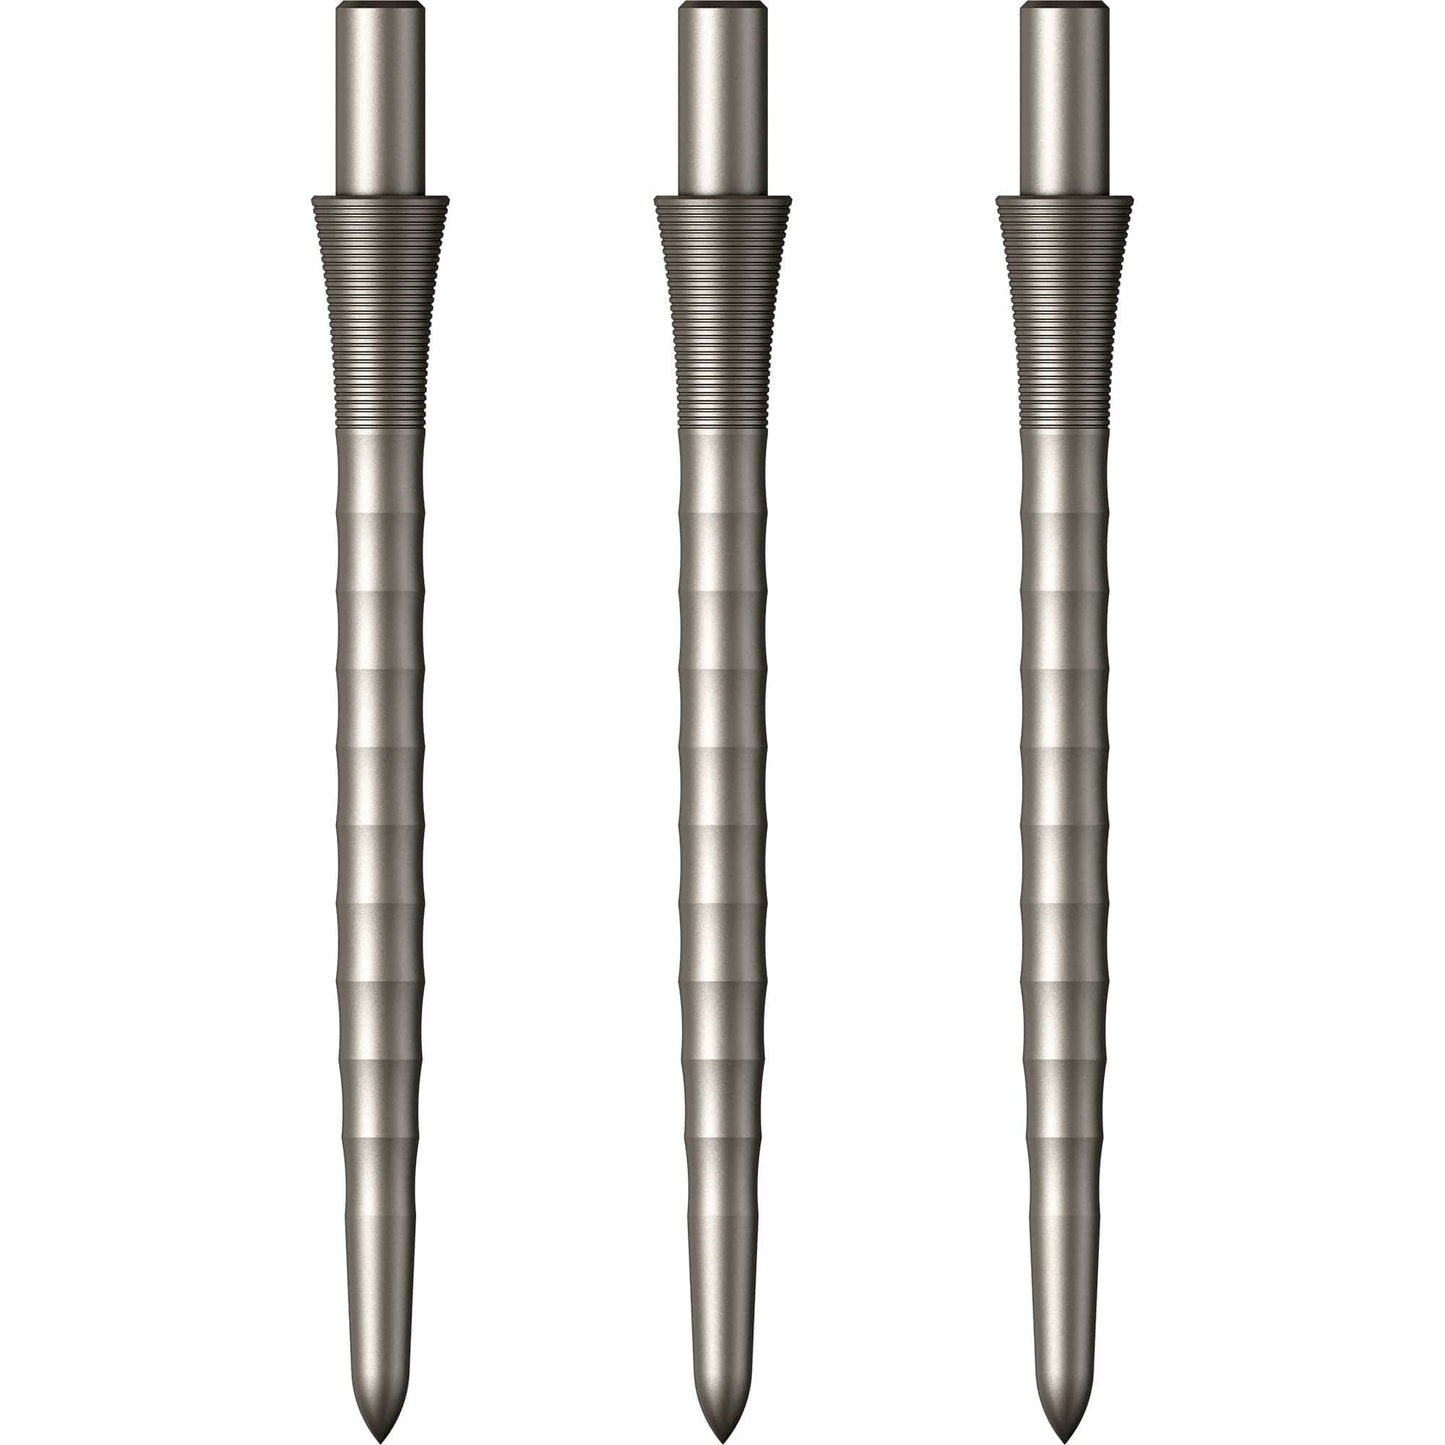 Mission Sniper Points - Steel Tip - Precision Spare Points - Ripple - Silver 32mm